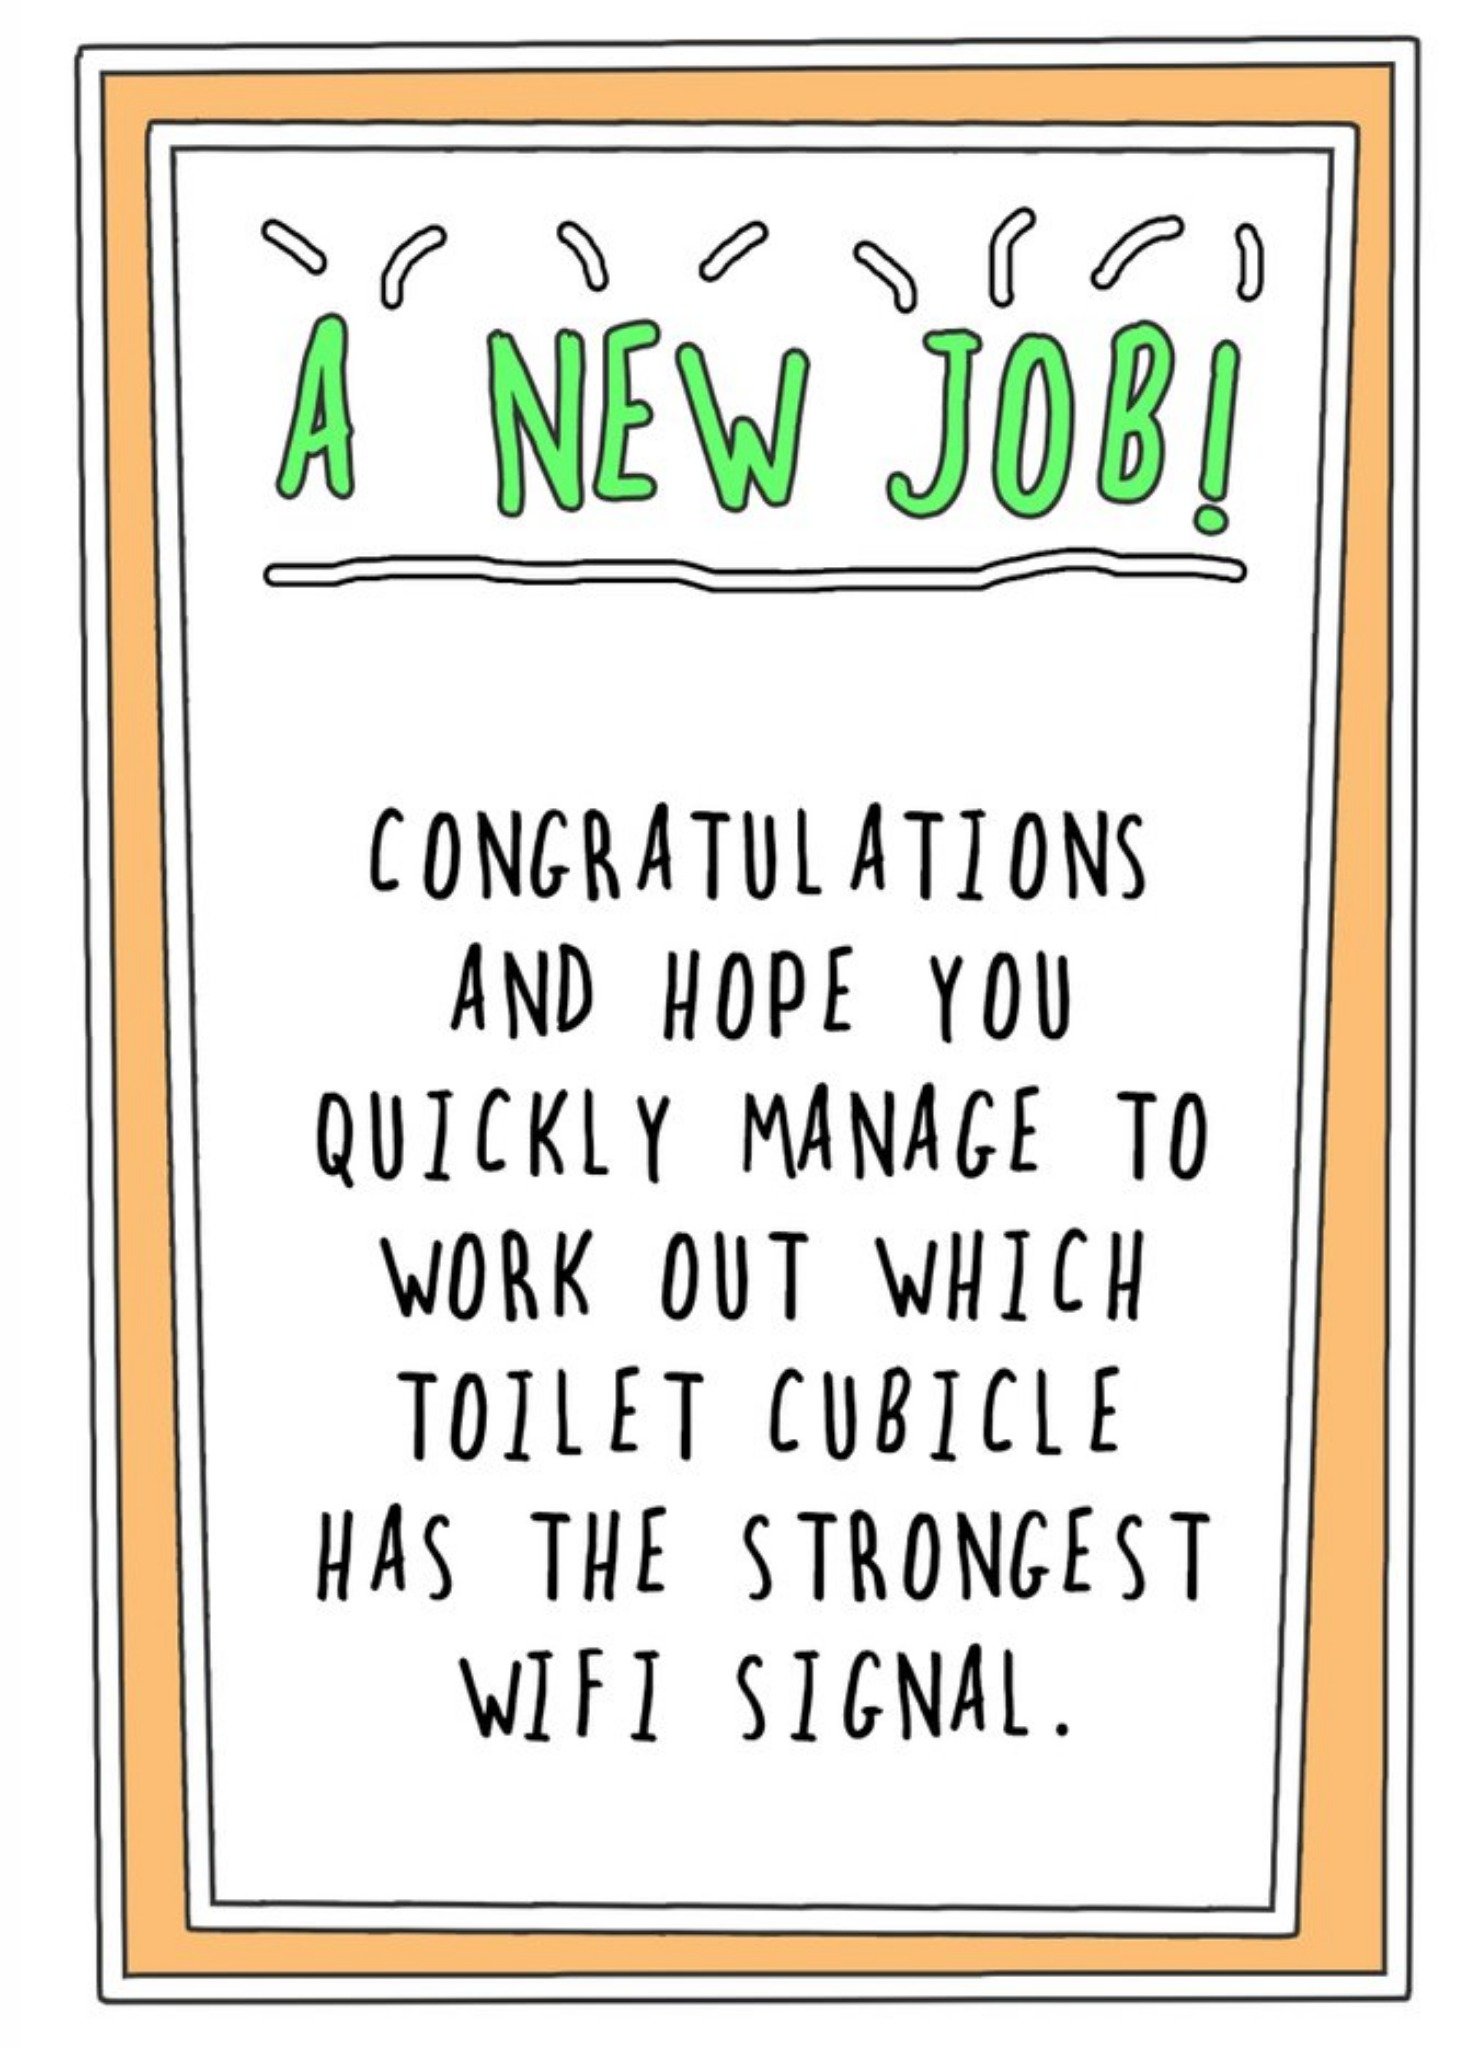 Go La La Funny A New Job Which Toilet Cubicle Has The Strongest Wi Fi Signal Card, Large